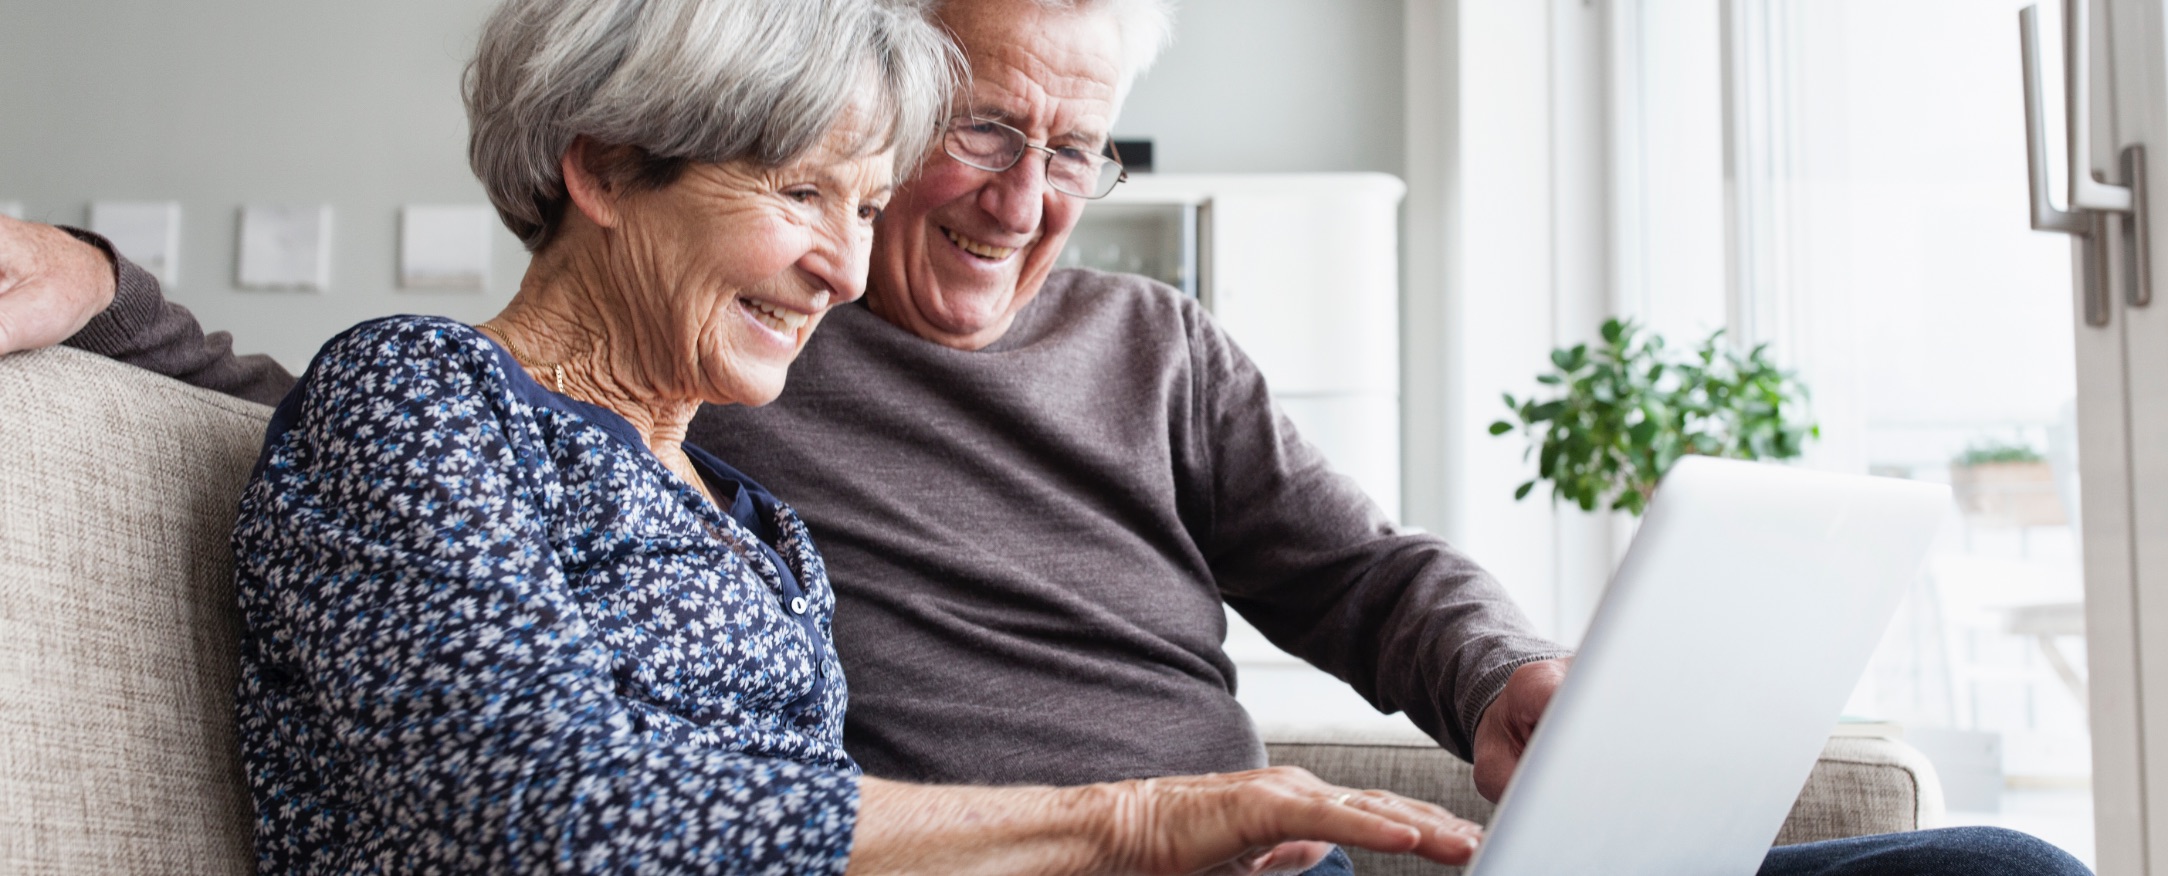 CloudResearch_Blog_Recruiting Older Adults Online_Senior couple using laptop together@2x